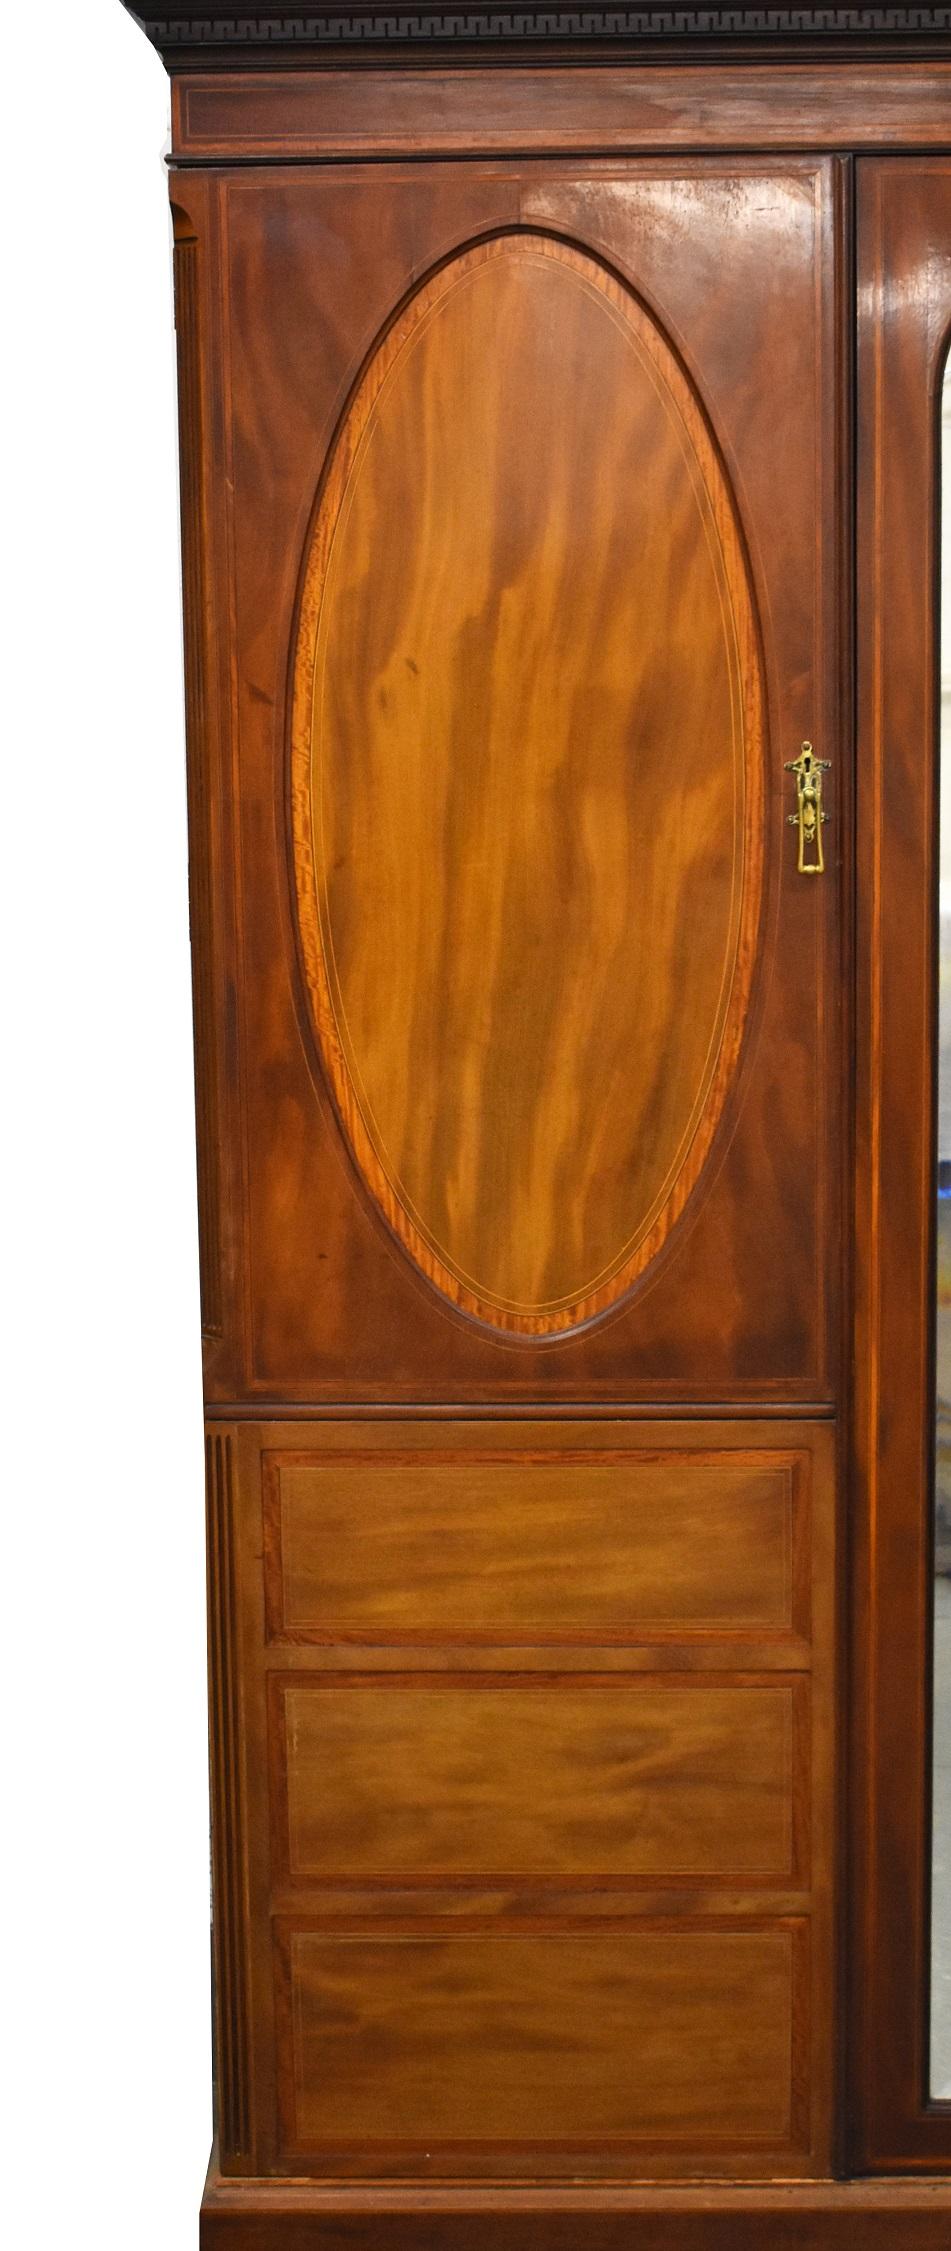 For sale is a good quality Edwardian Triple wardrobe. The top of the wardrobe has a removable pediment with dentil molding. Below the top the wardrobe has three doors, one mirrored door in the centre and one paneled door on either side. When opened